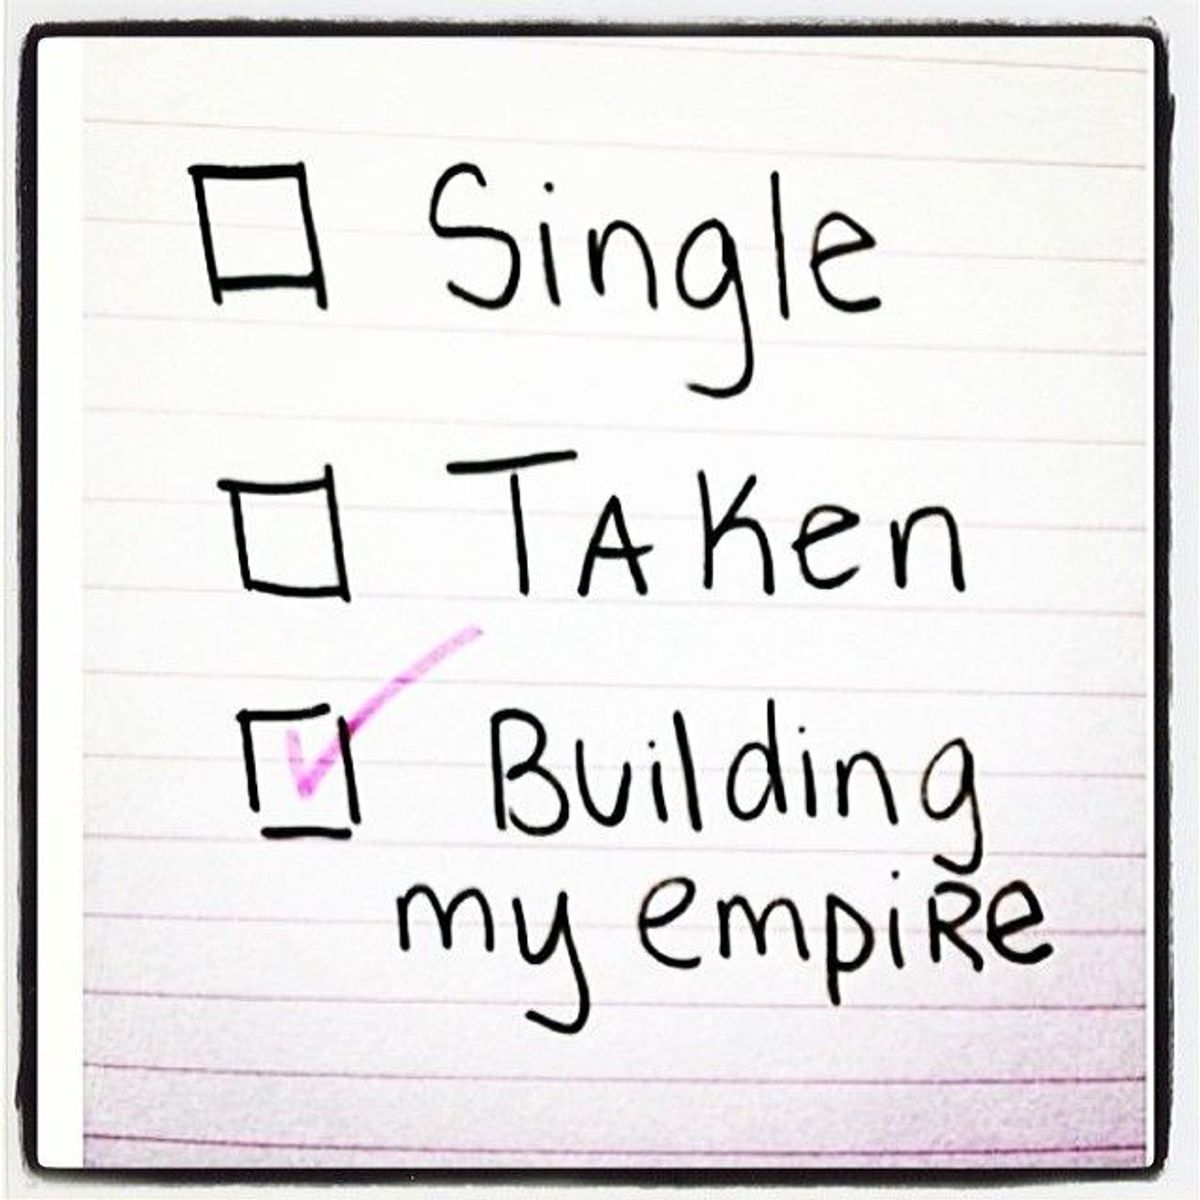 I'm Not Rushing To The Altar. Build Your Own Empire.